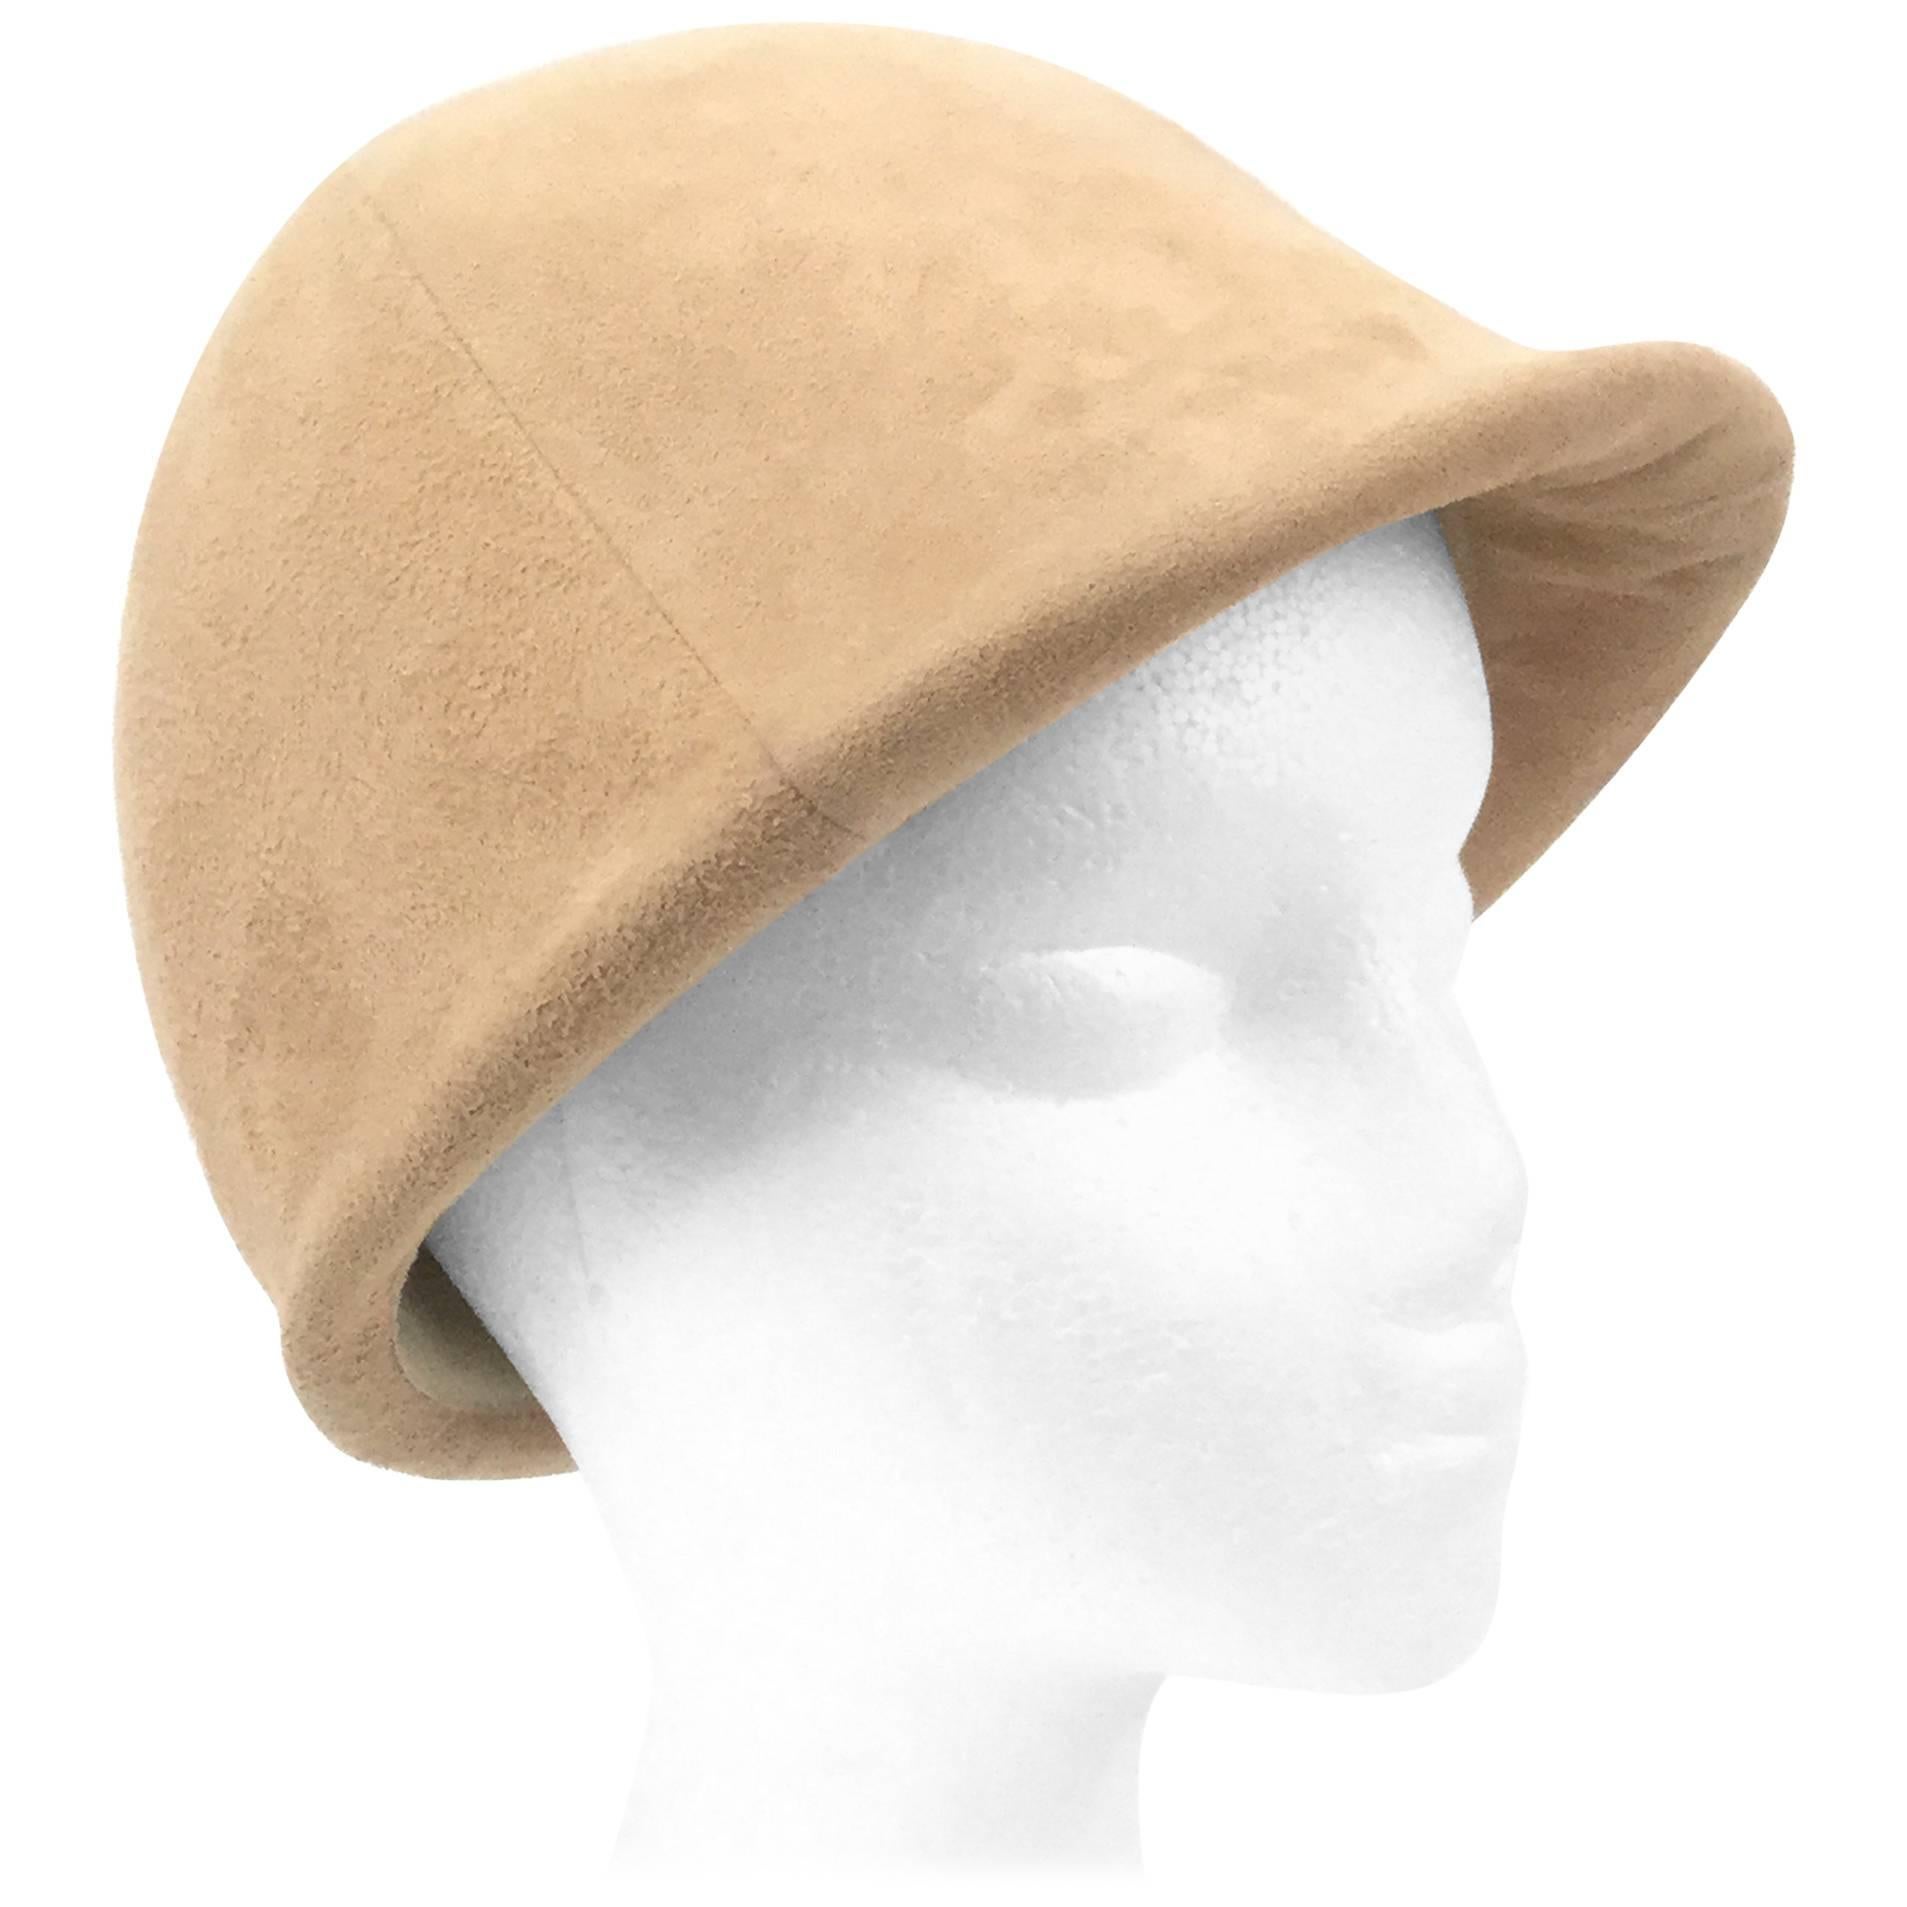 Elegant and playful suede mod equestrian hat! This fun hat is composed of four panels of camel colored suede, brought together at the top of the hat's crown and accented with a single plush suede button. The back of the hat has a short decorative